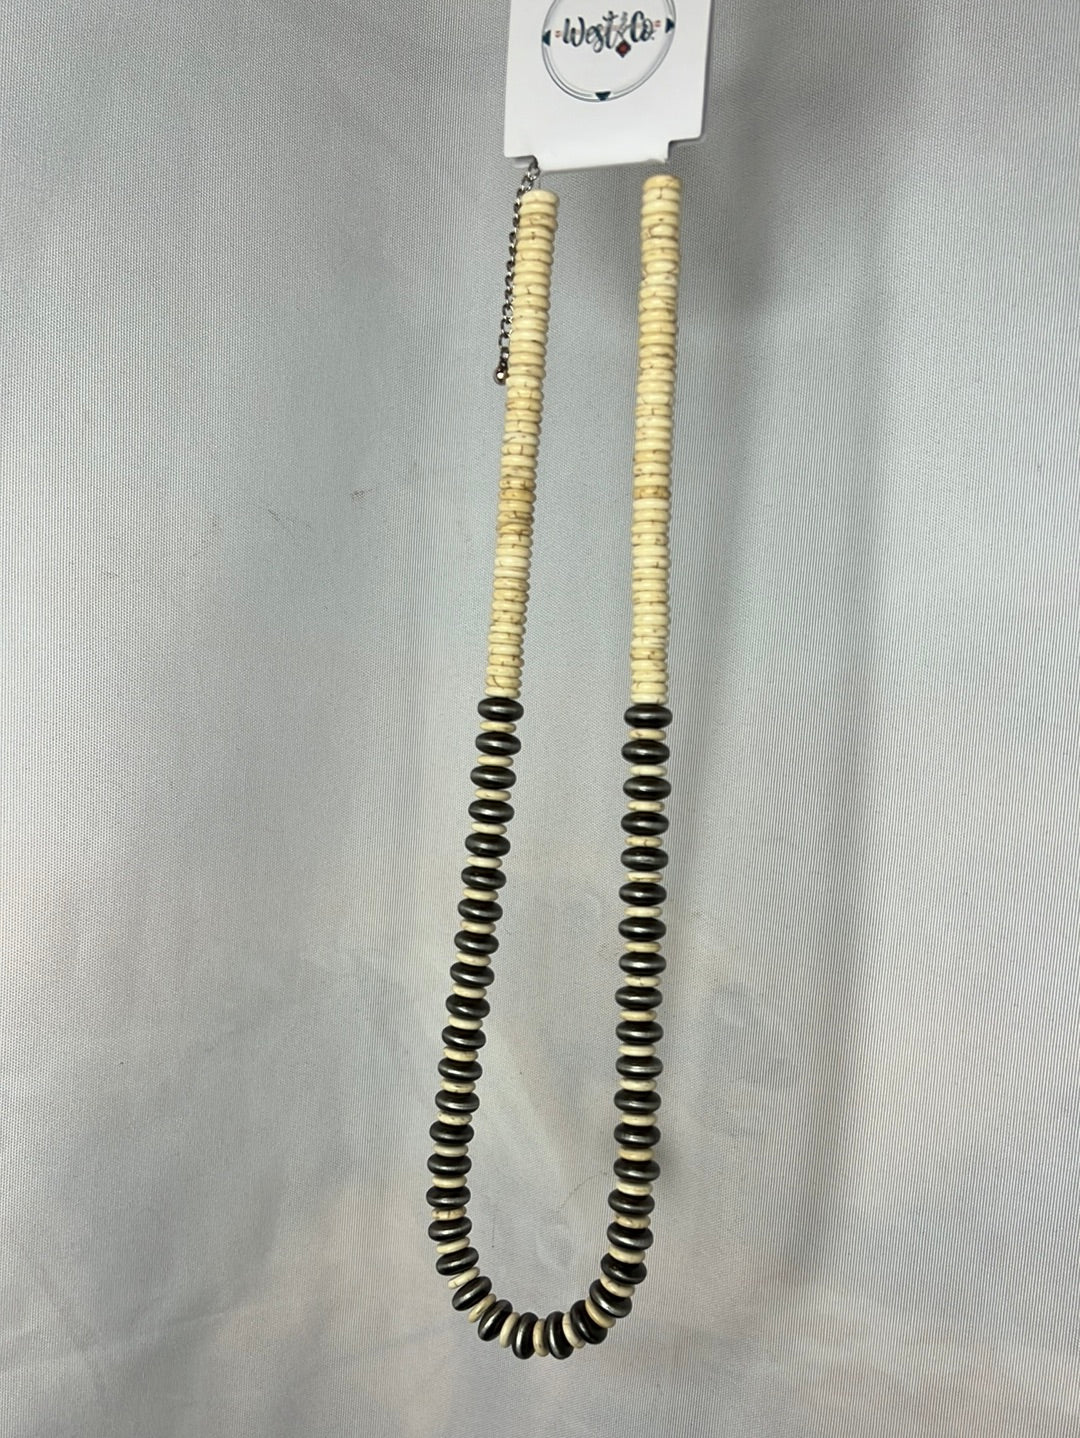 West & Co. Cream and Metallic Bead Necklace